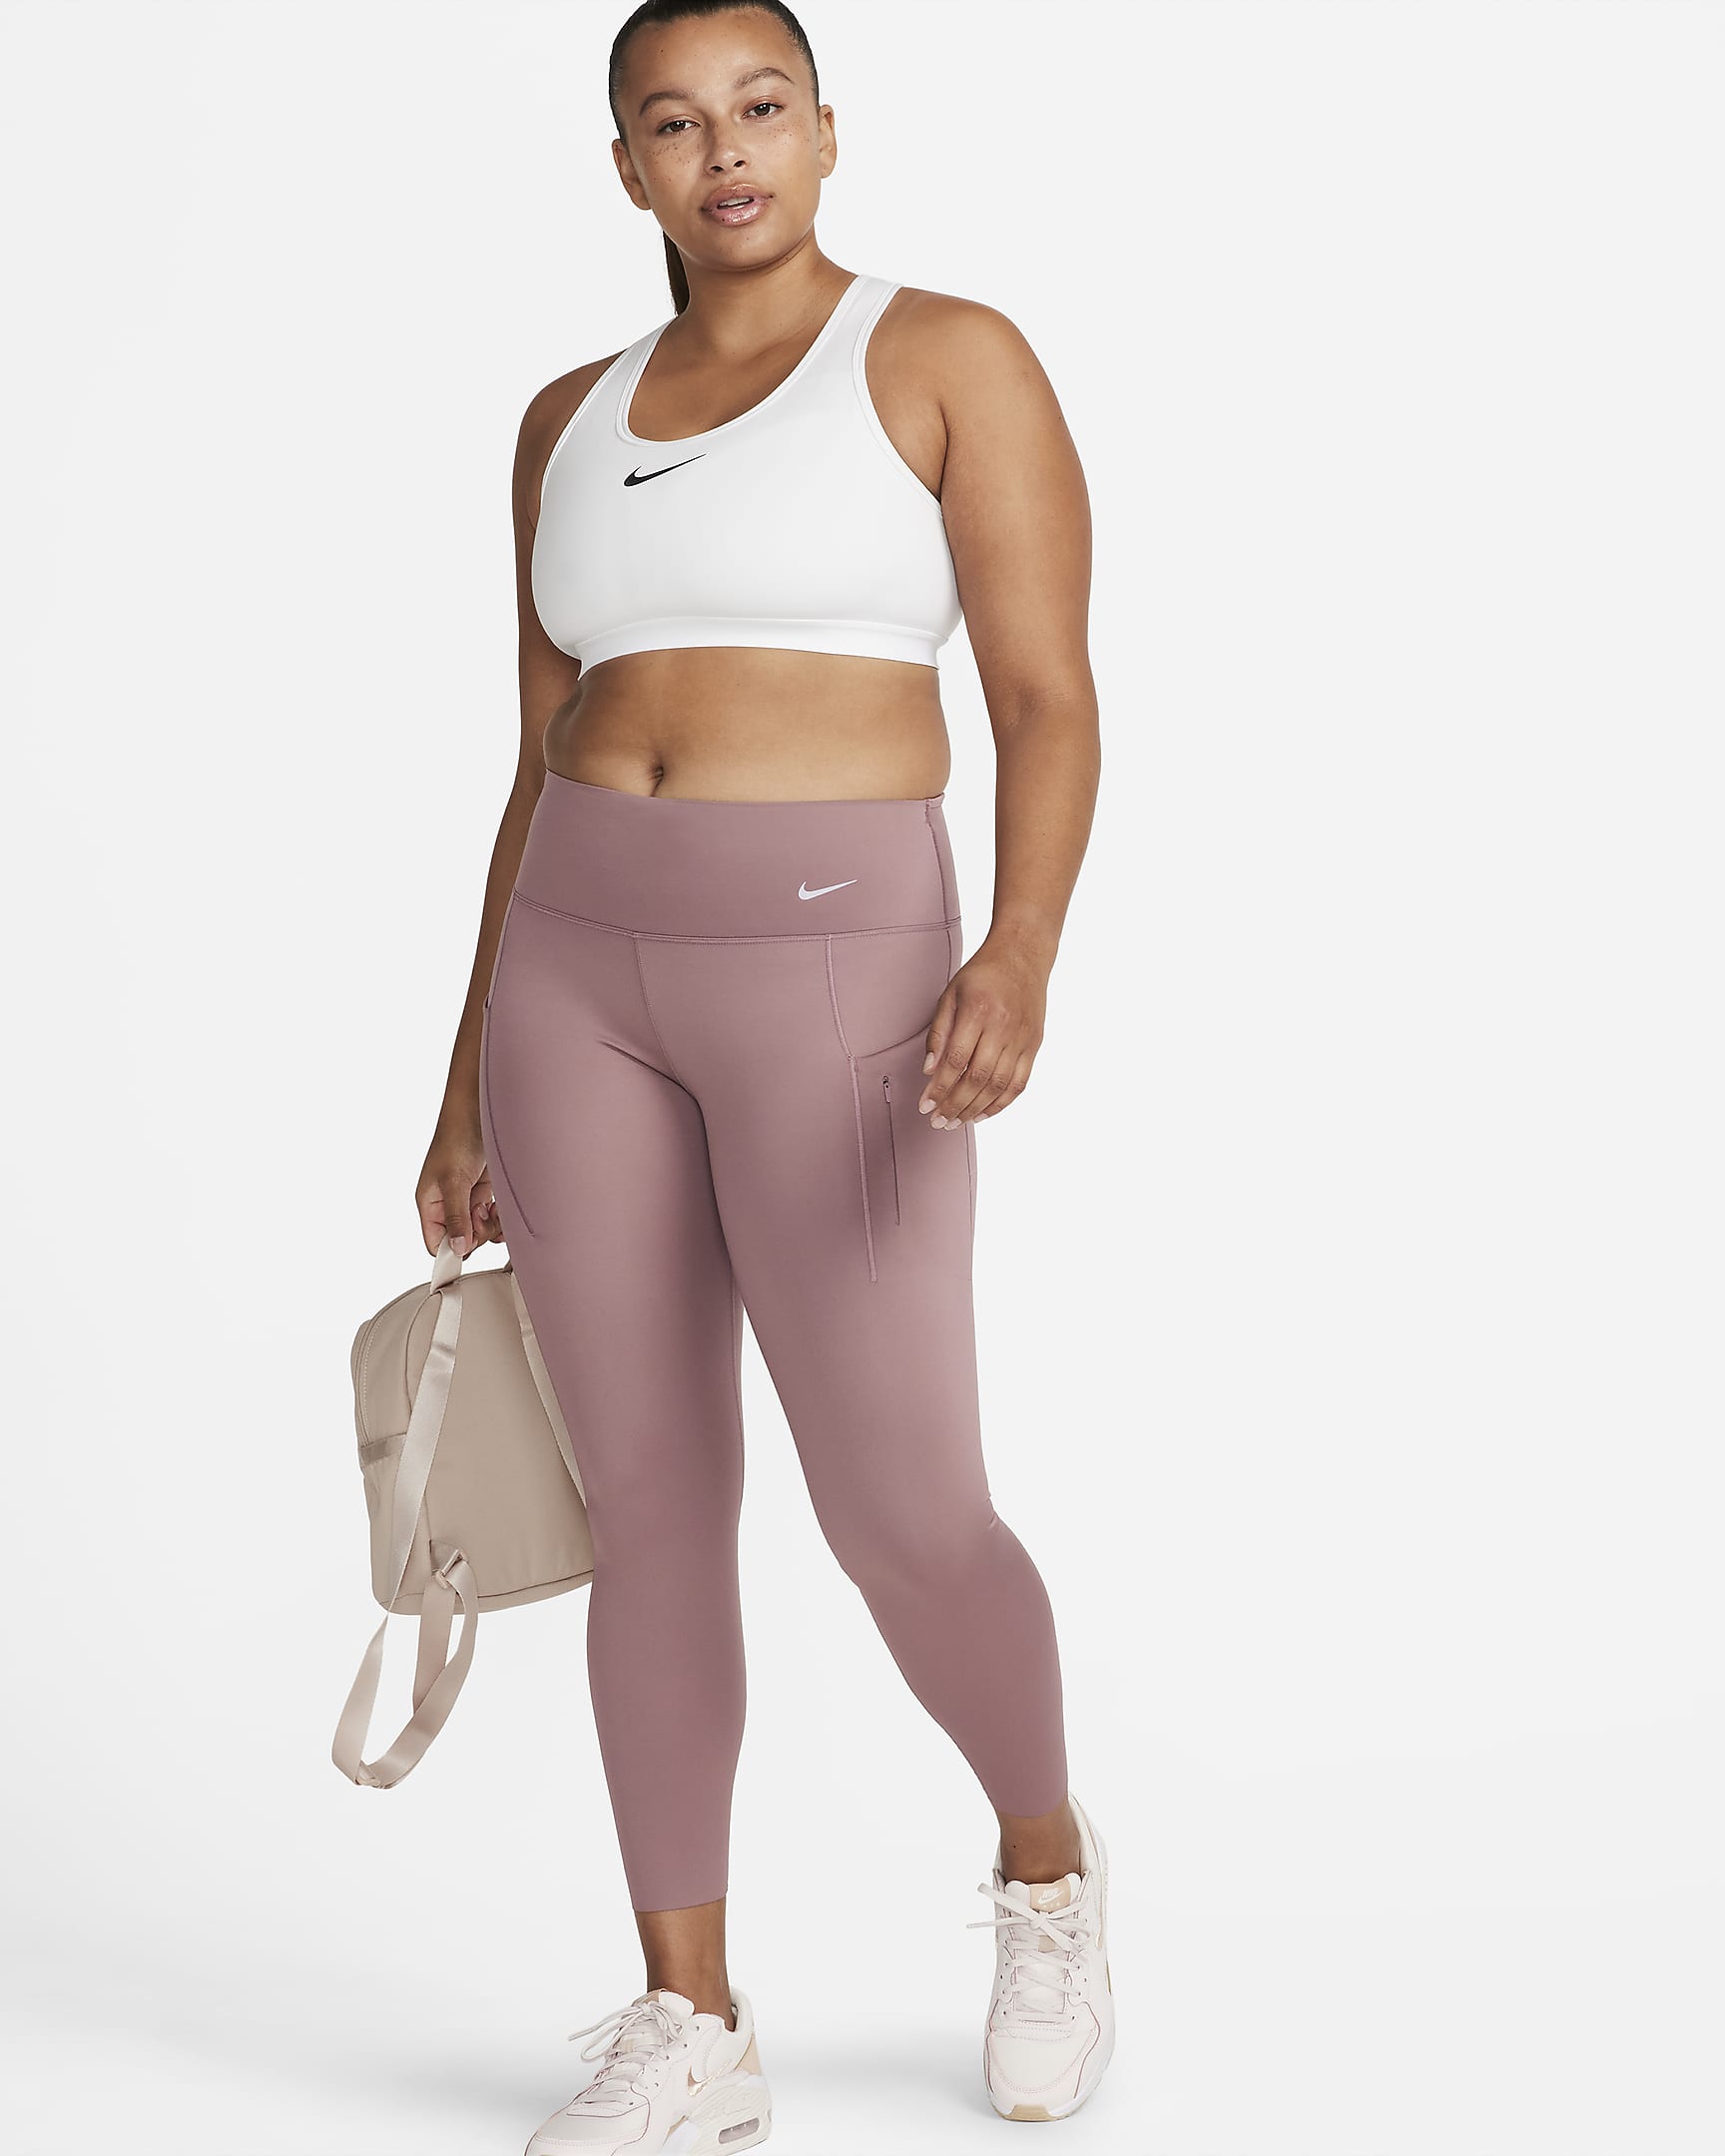 Nike Go Women's Firm-Support Mid-Rise 7/8 Leggings with Pockets - Smokey Mauve/Black